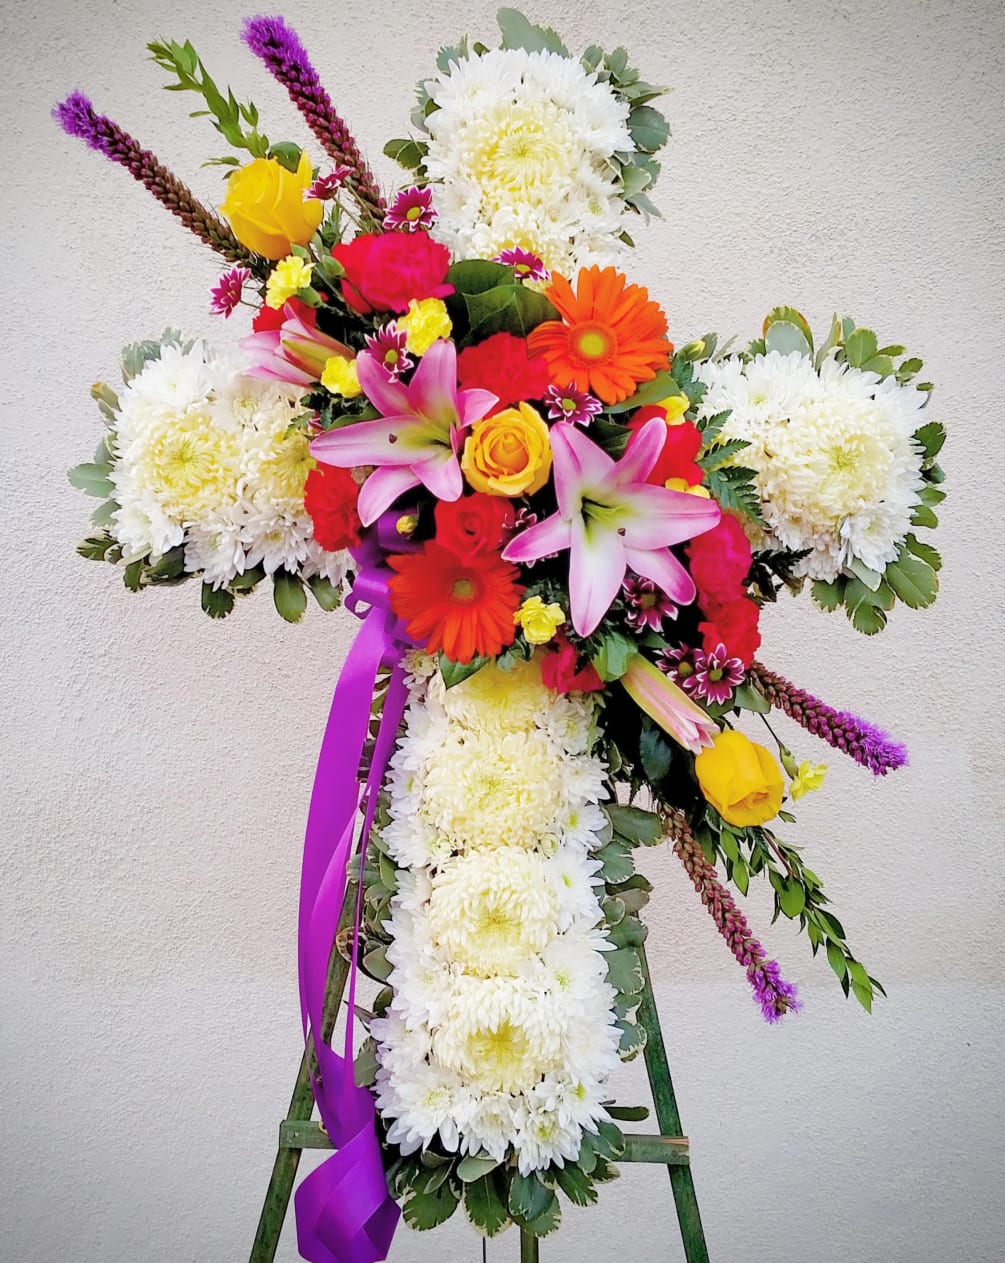 This cross is a mix of chrysanthemums with a bright spray of